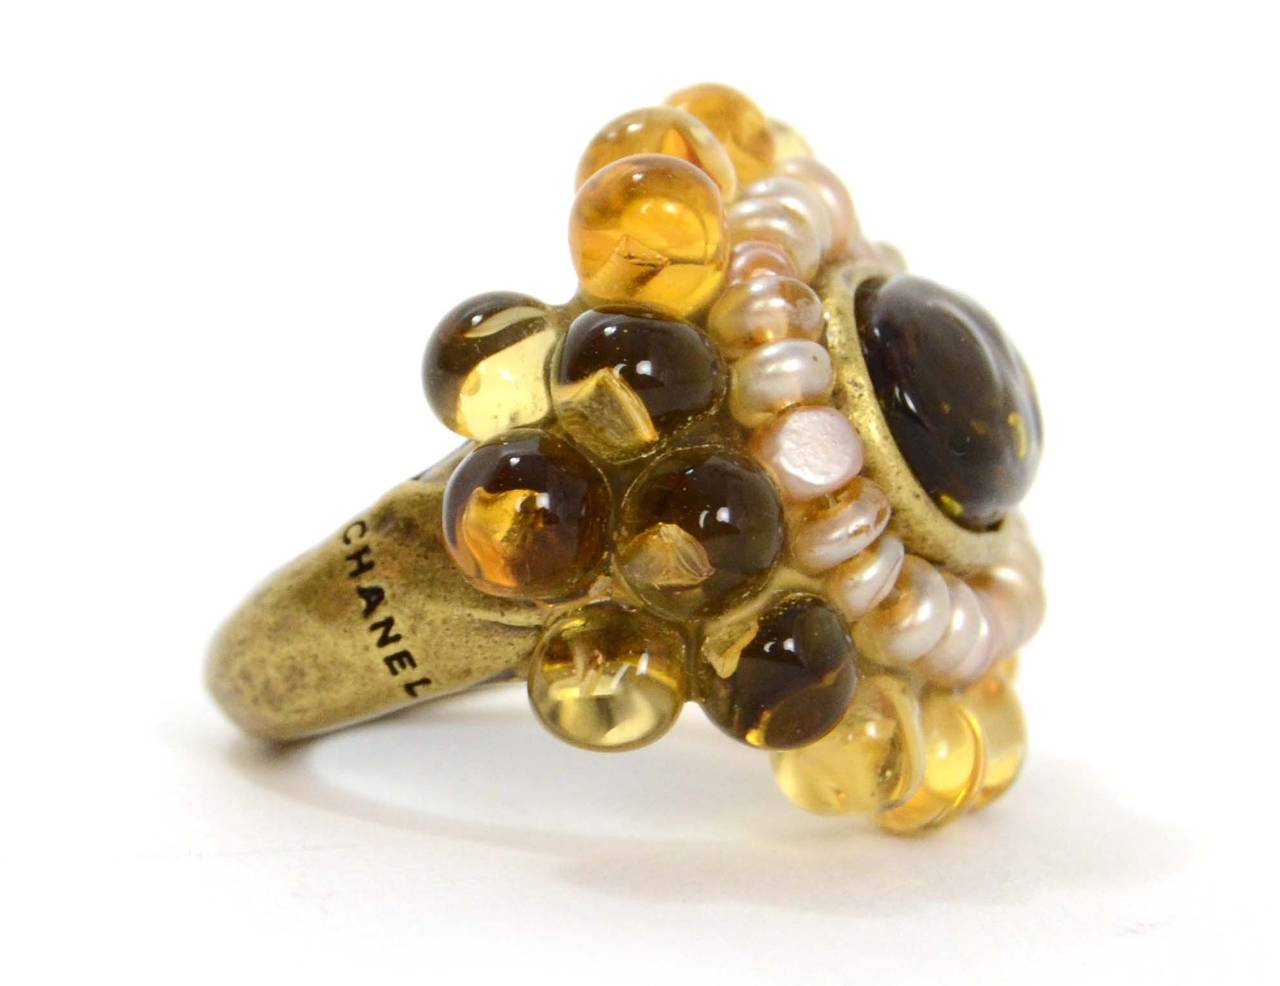 Chanel Pearl & Amber Glass Ring
Features poured glass and faux pearl intricate pendant

Made In: France
Year of Production: 2000
Color: Bronze, amber and ivory
Materials: Metal, faux pearl and poured glass
Closure: None
Stamp: 00 CC